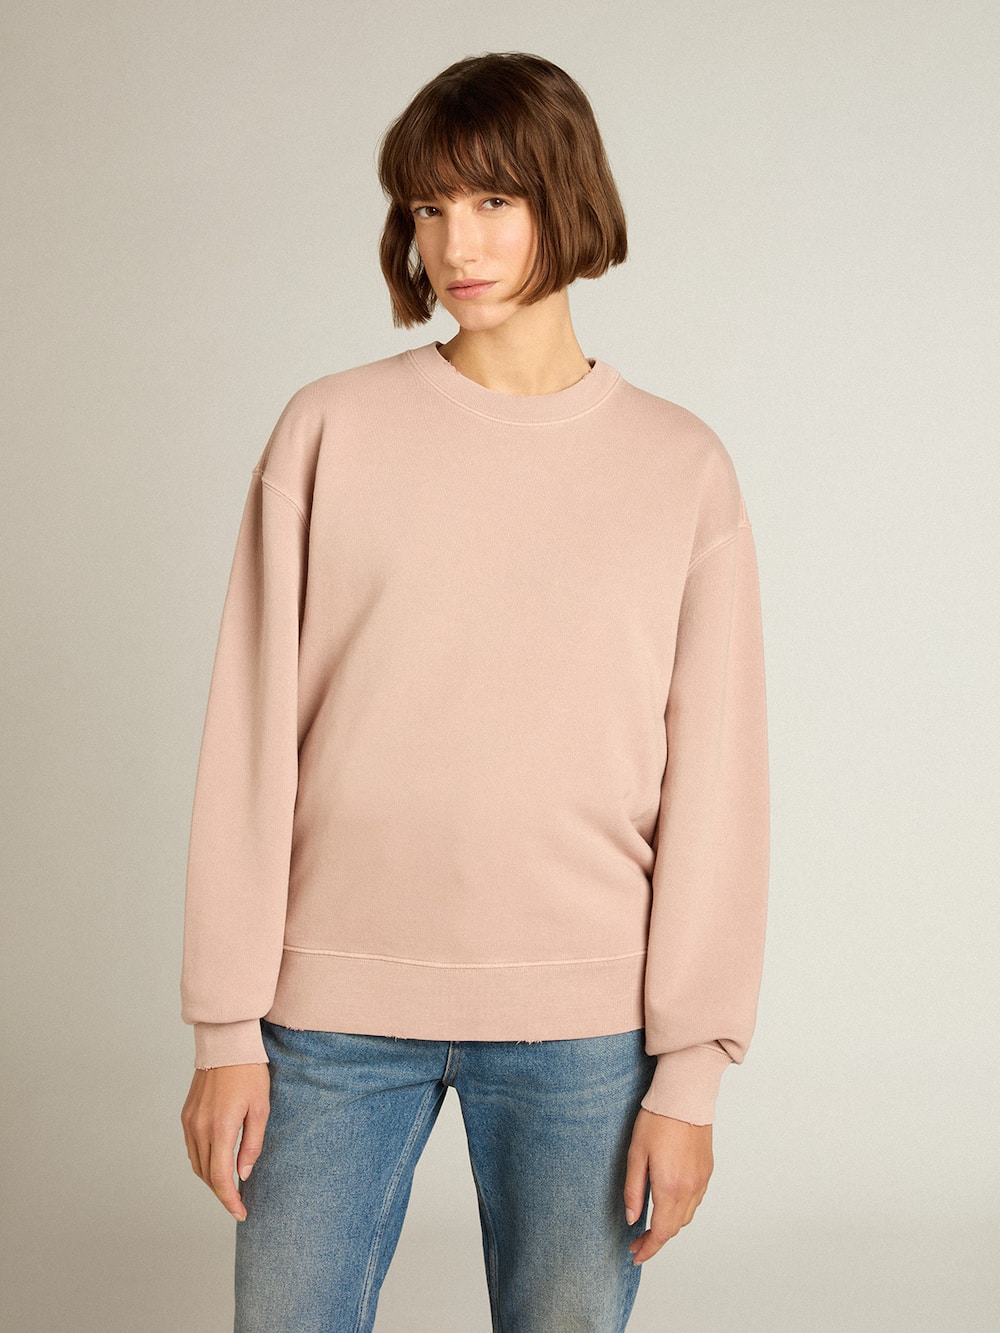 Golden Goose - Powder-pink sweatshirt with reverse logo on the back - Asian fit in 